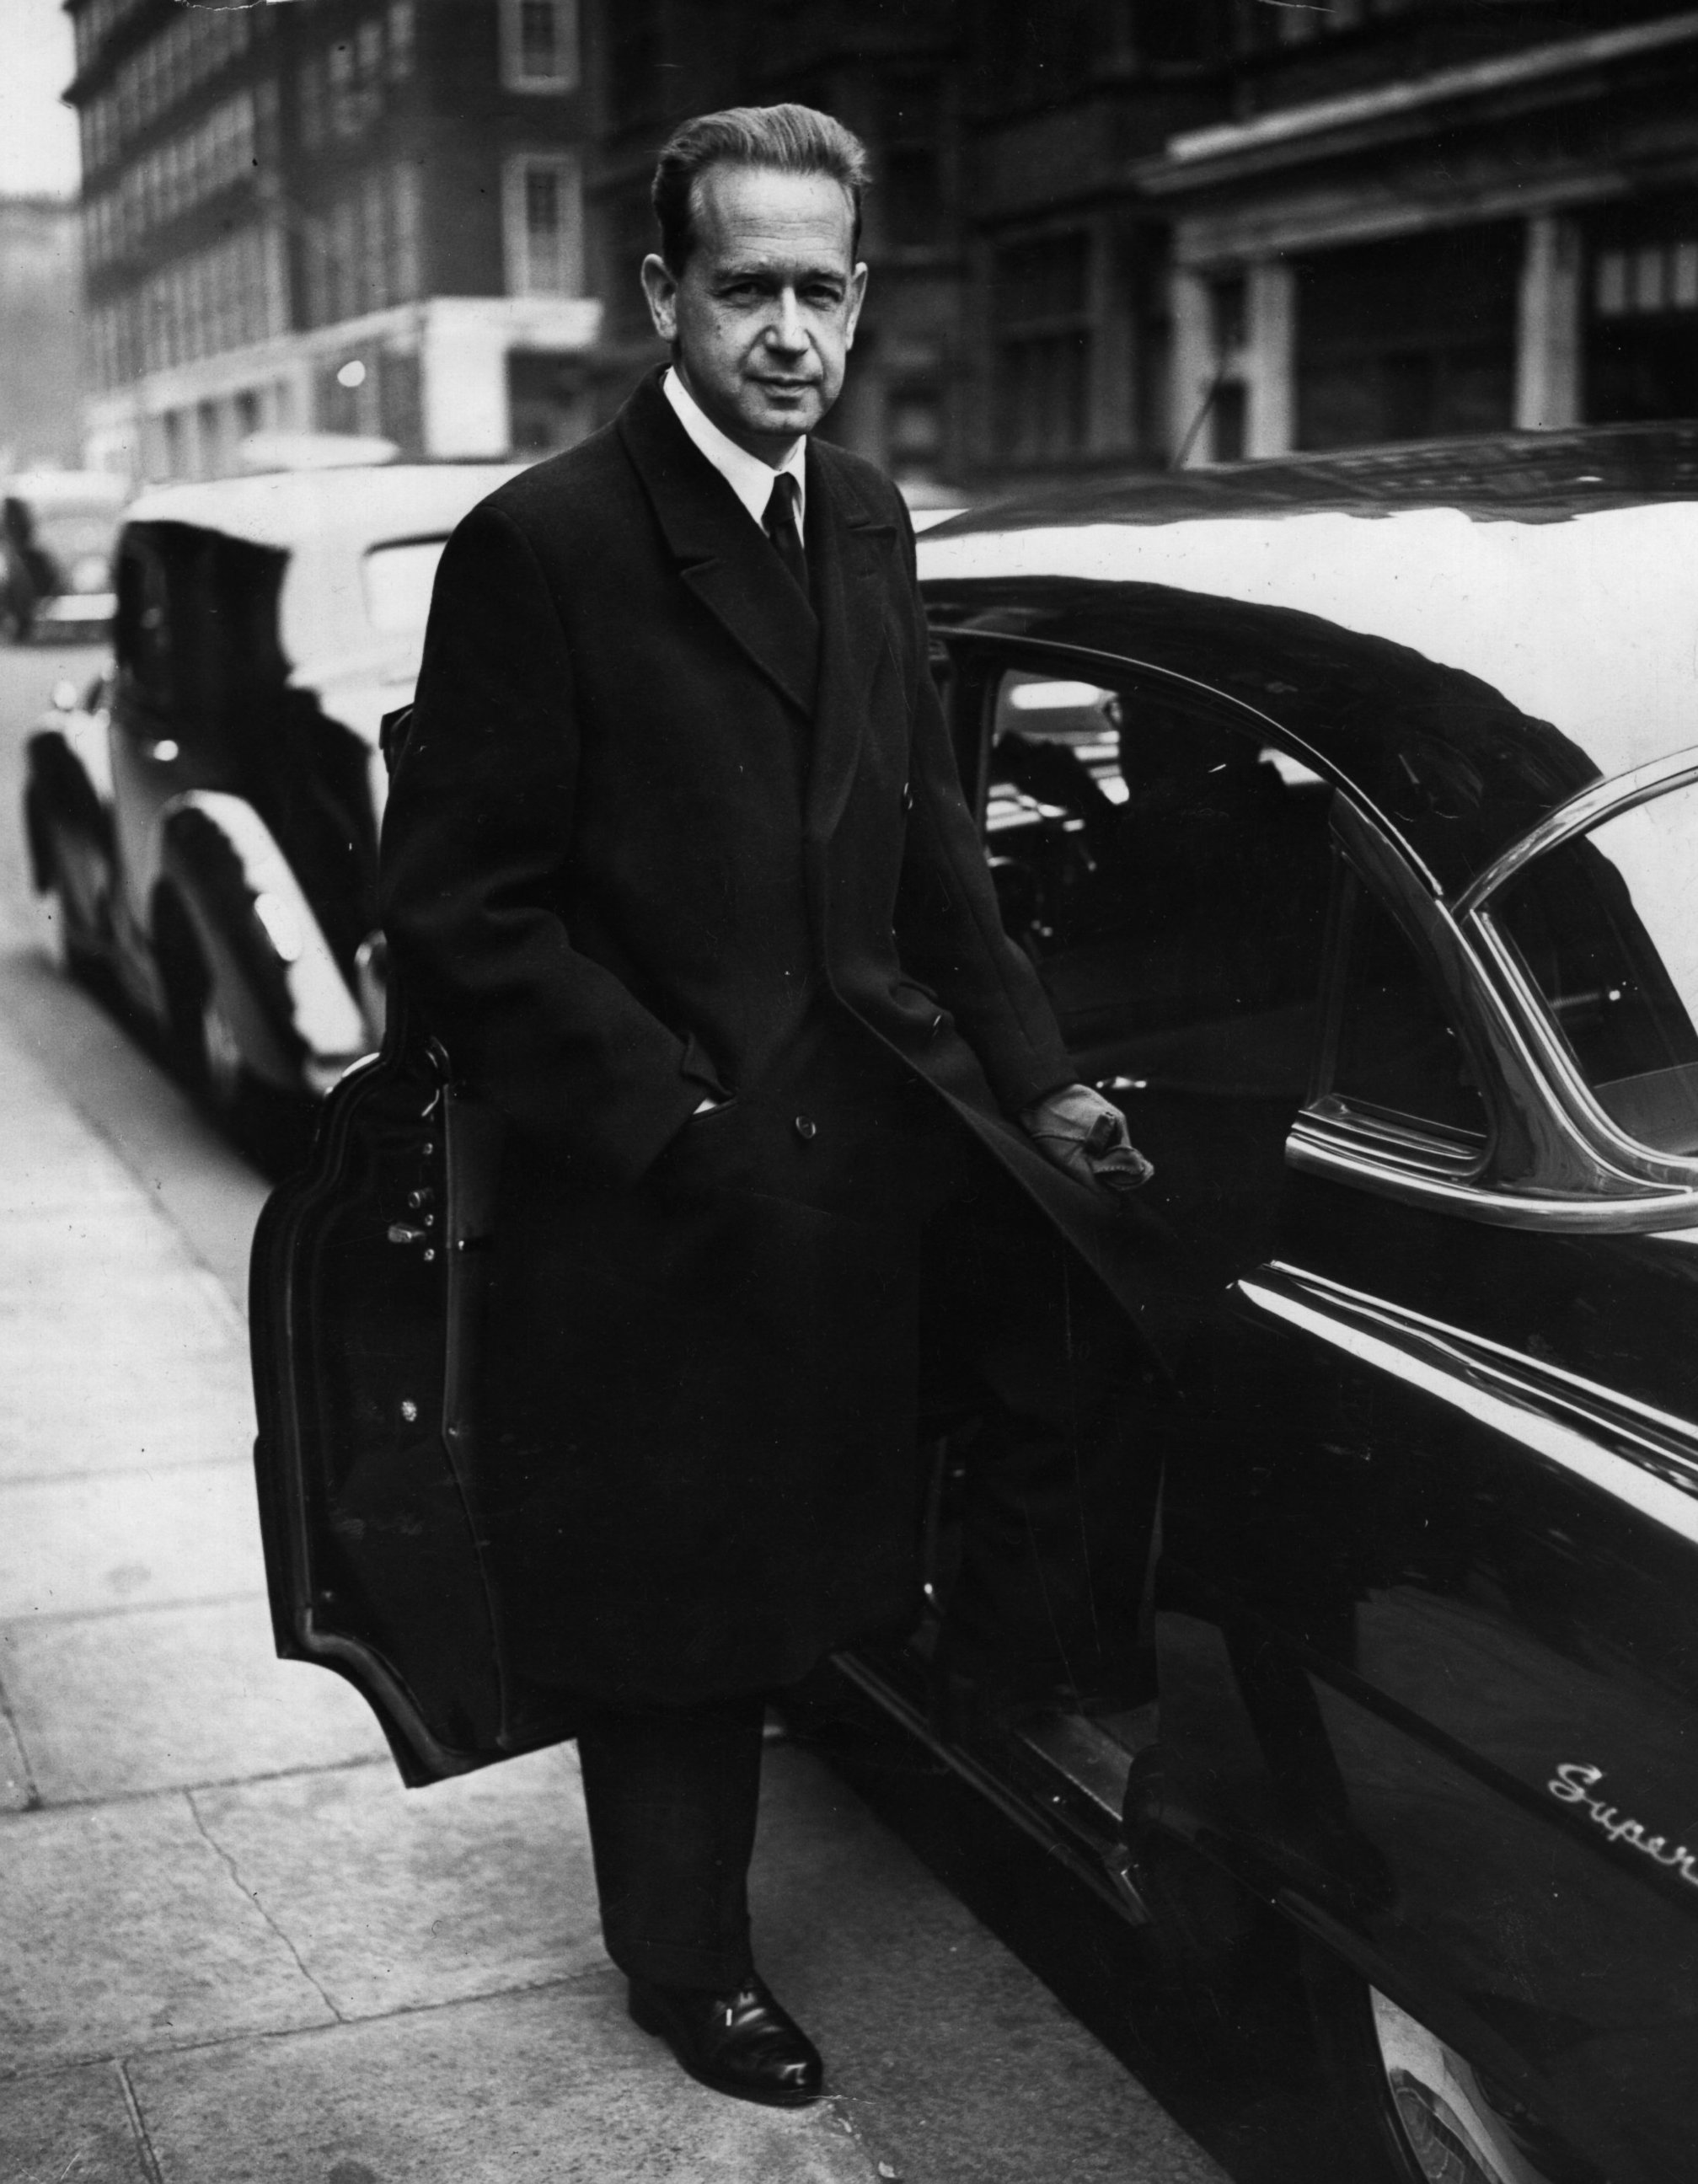 PHOTO: Dag Hammarskjold is seen leaving the Claridges Hotel in London in this file photo.